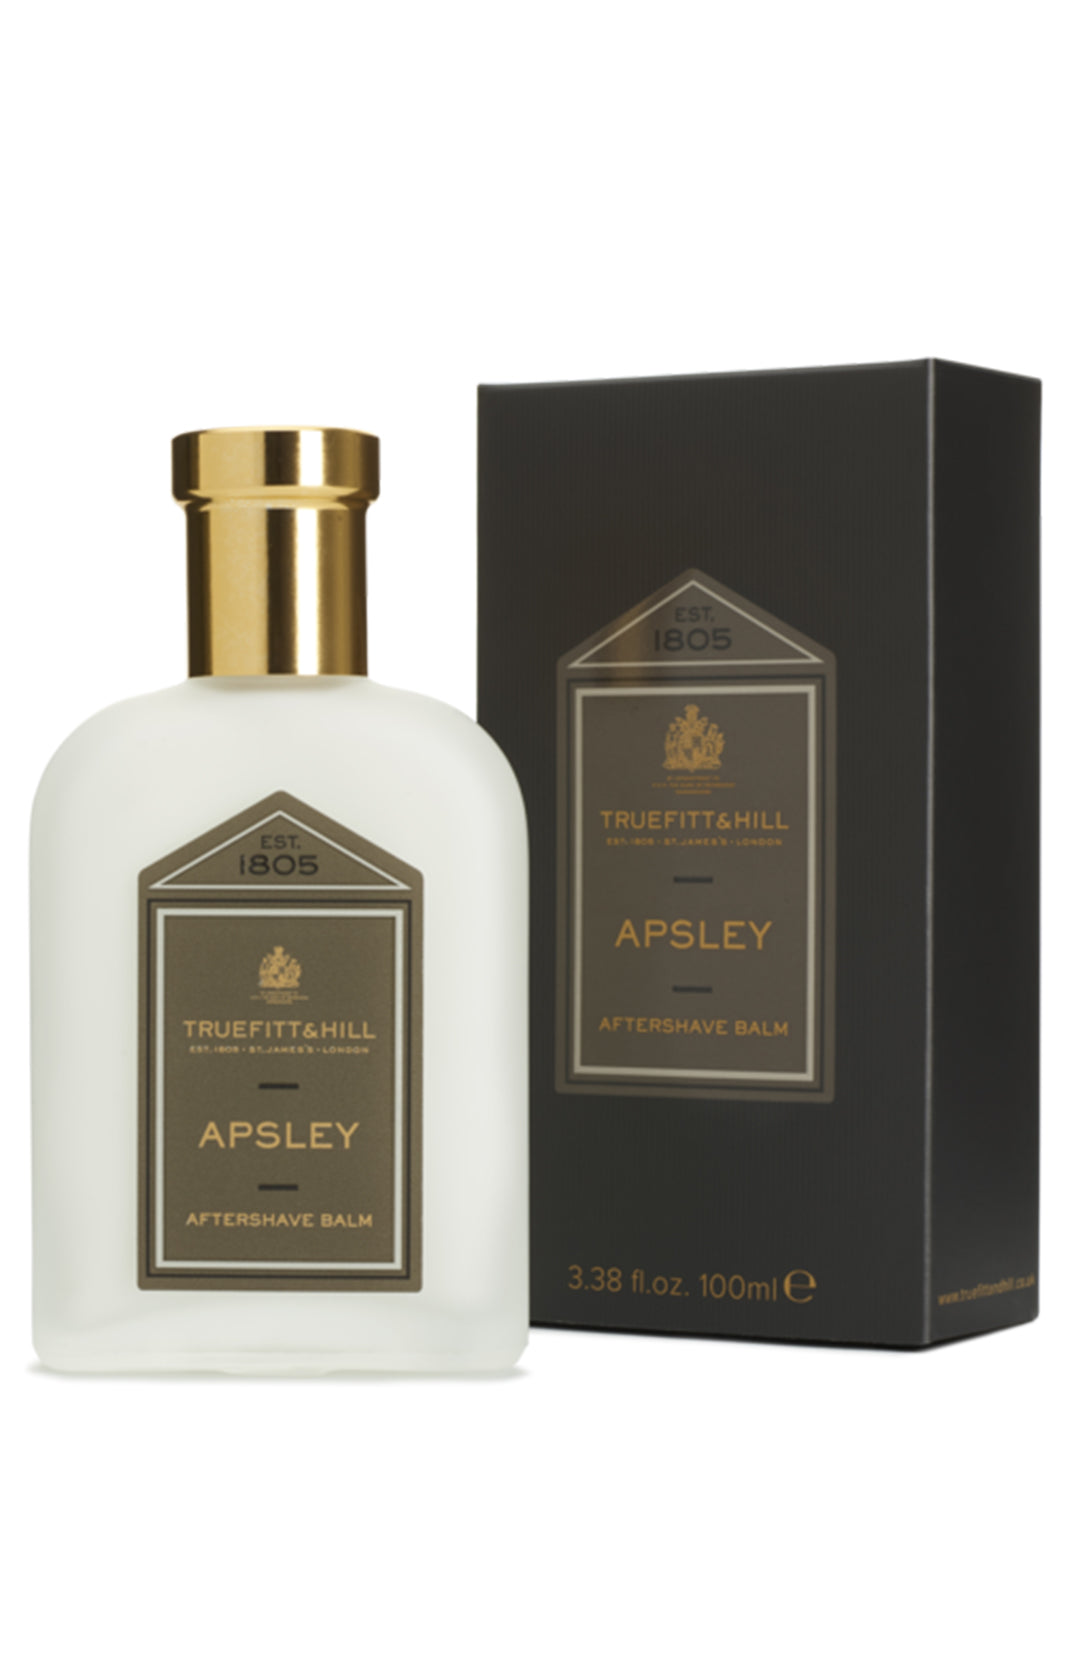 APSLEY AFTERSHAVE BALM